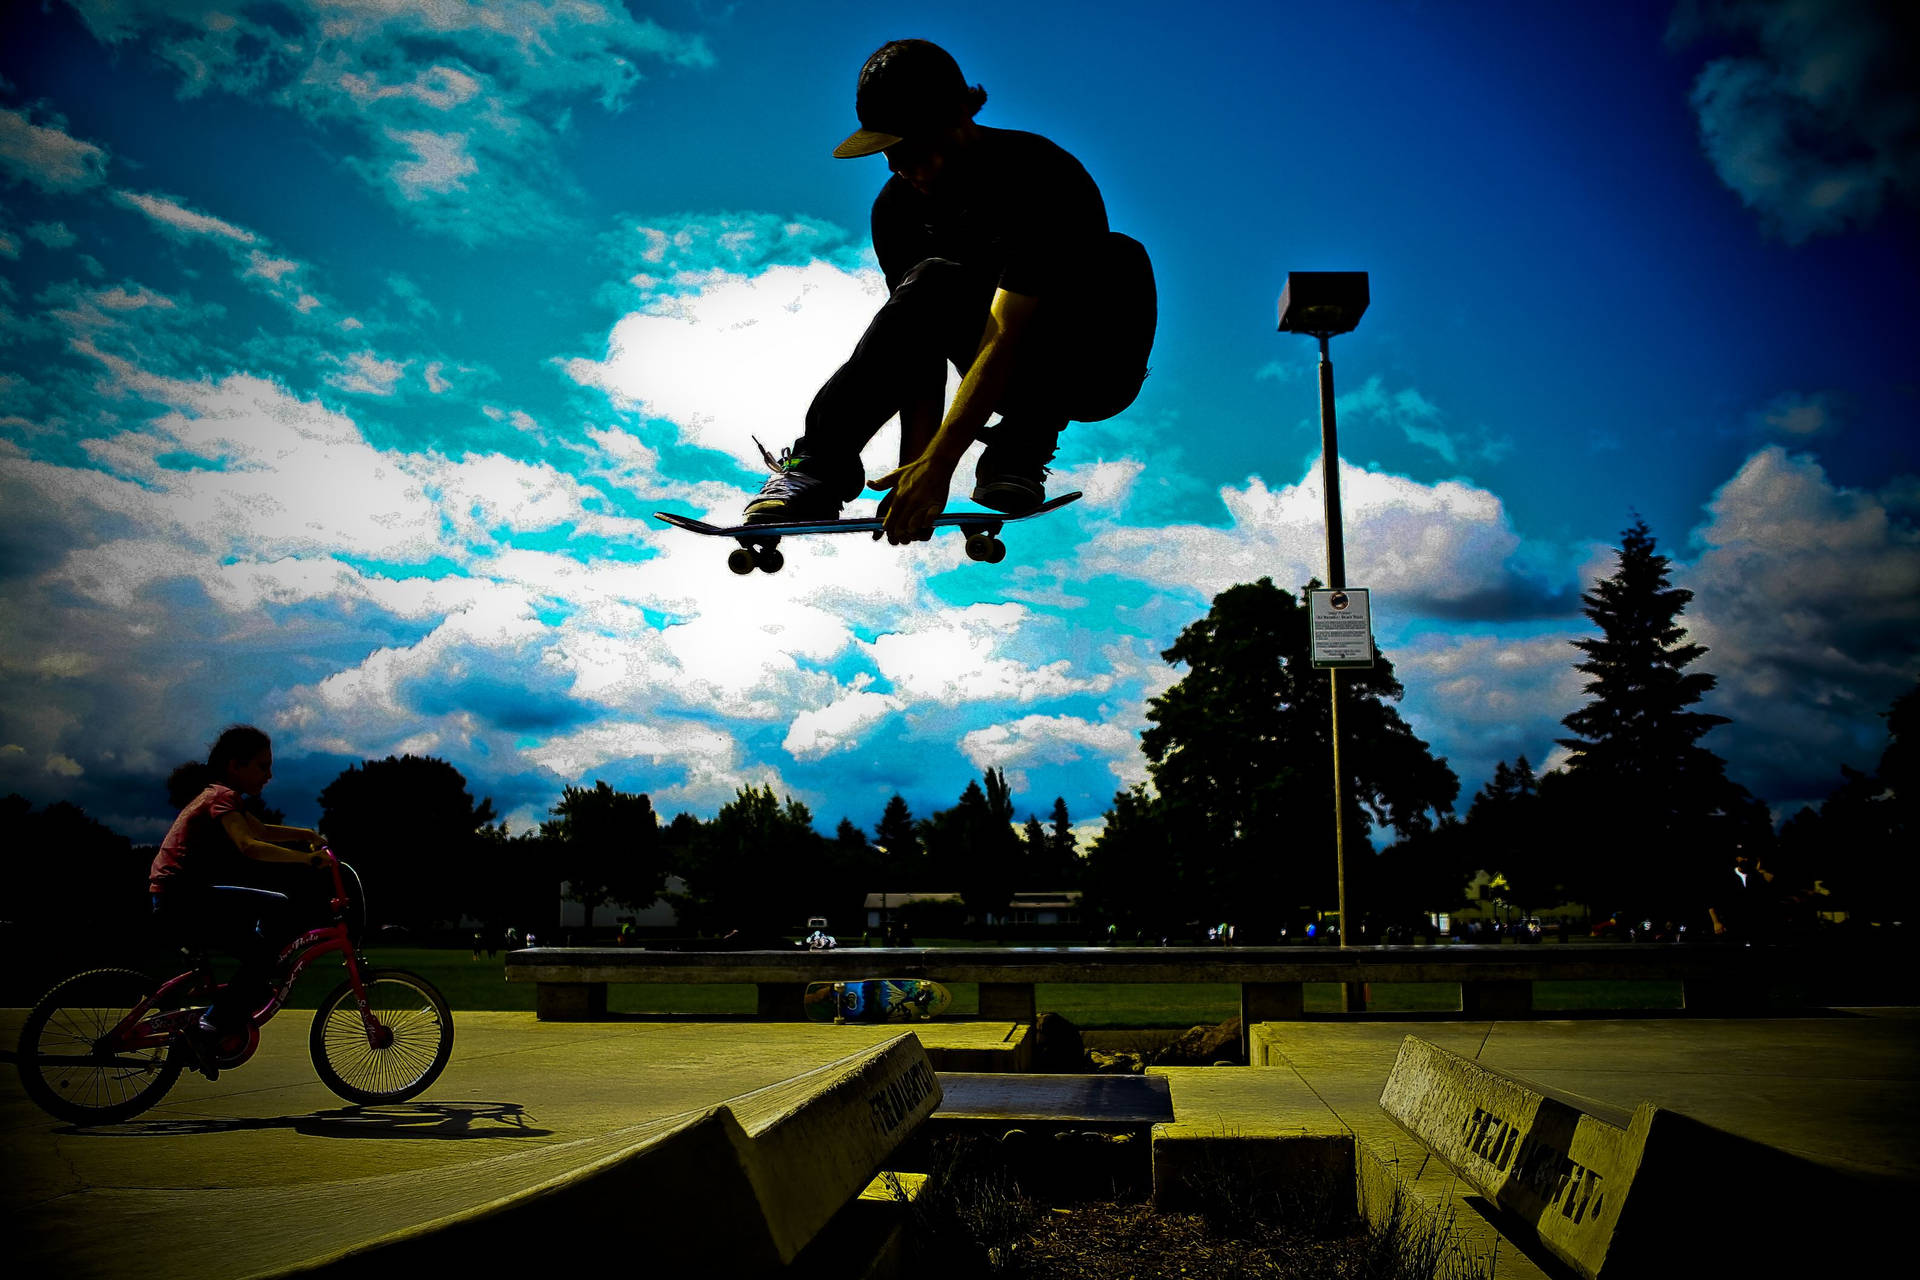 Skateboard Enthusiast Performing Tricks In Silhouette Background